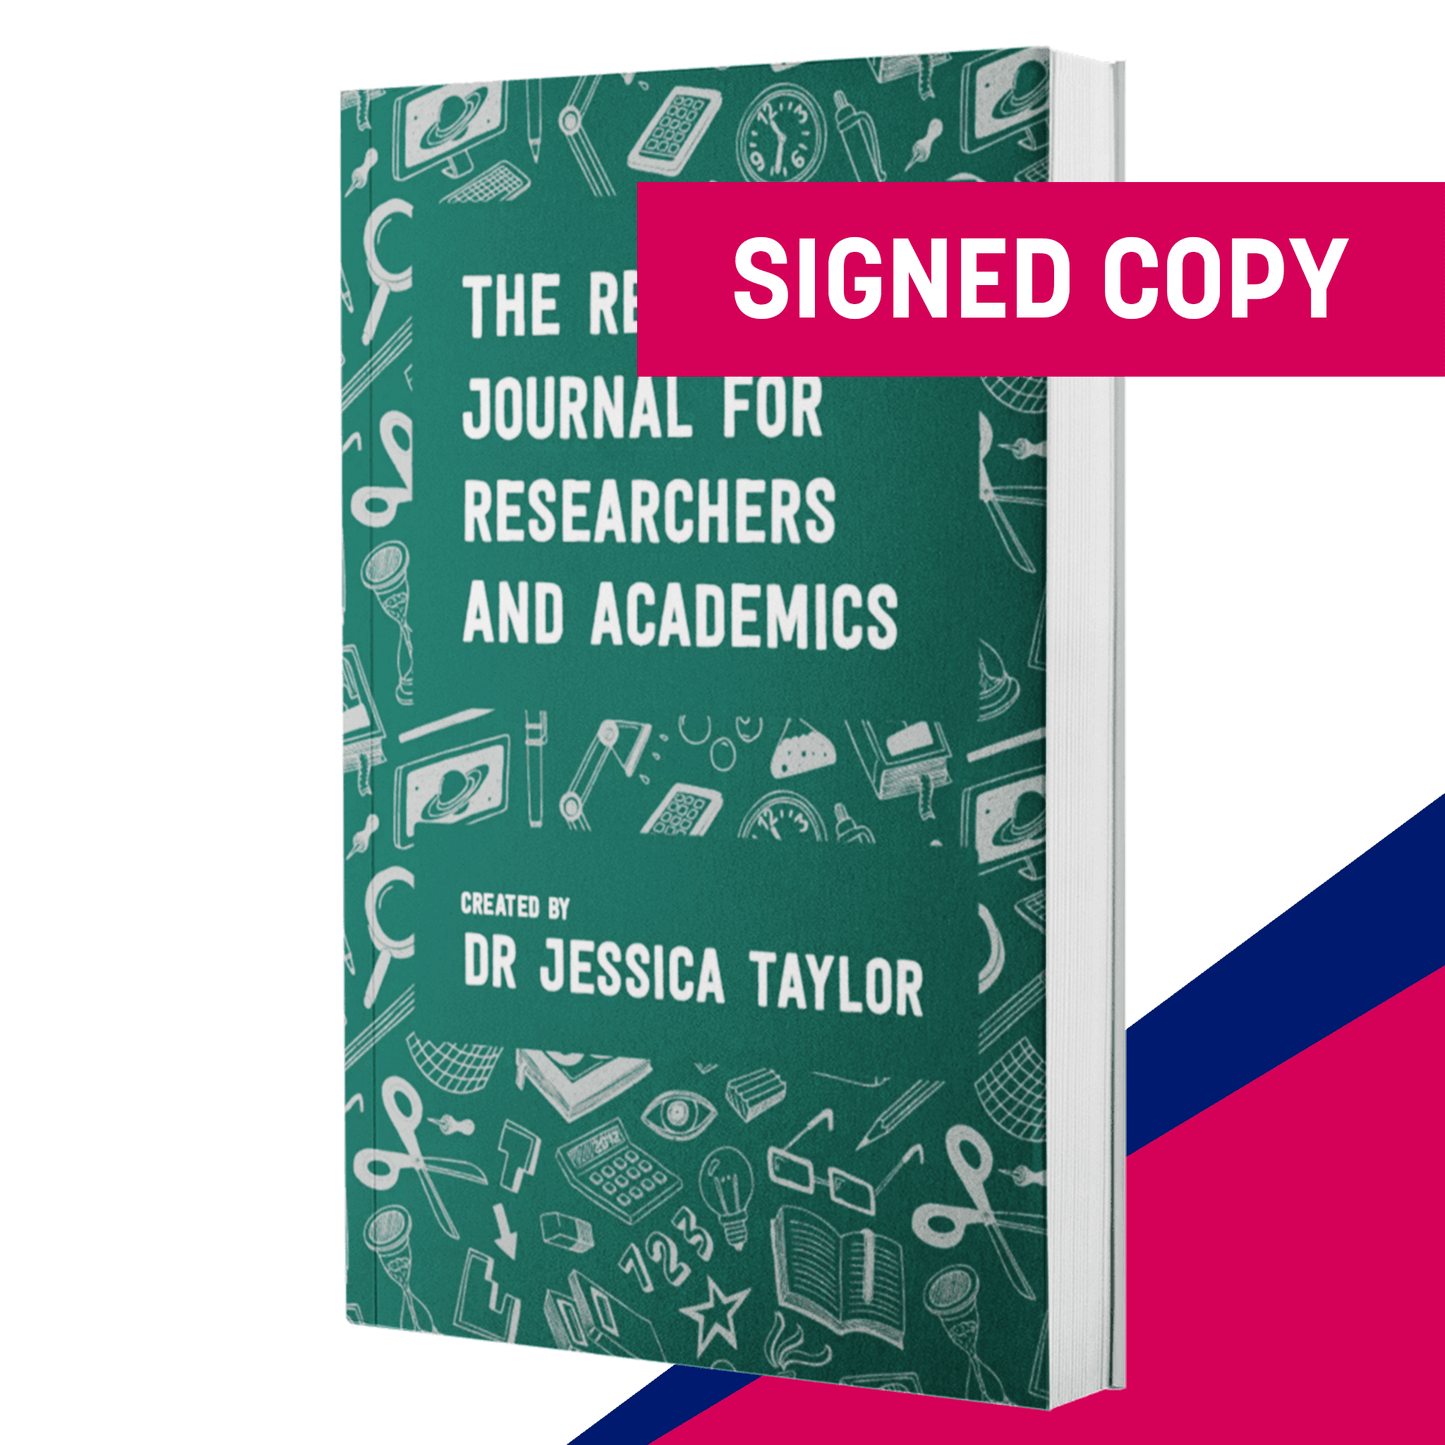 SIGNED & personalised: The Reflective Journal for Researchers and Academics